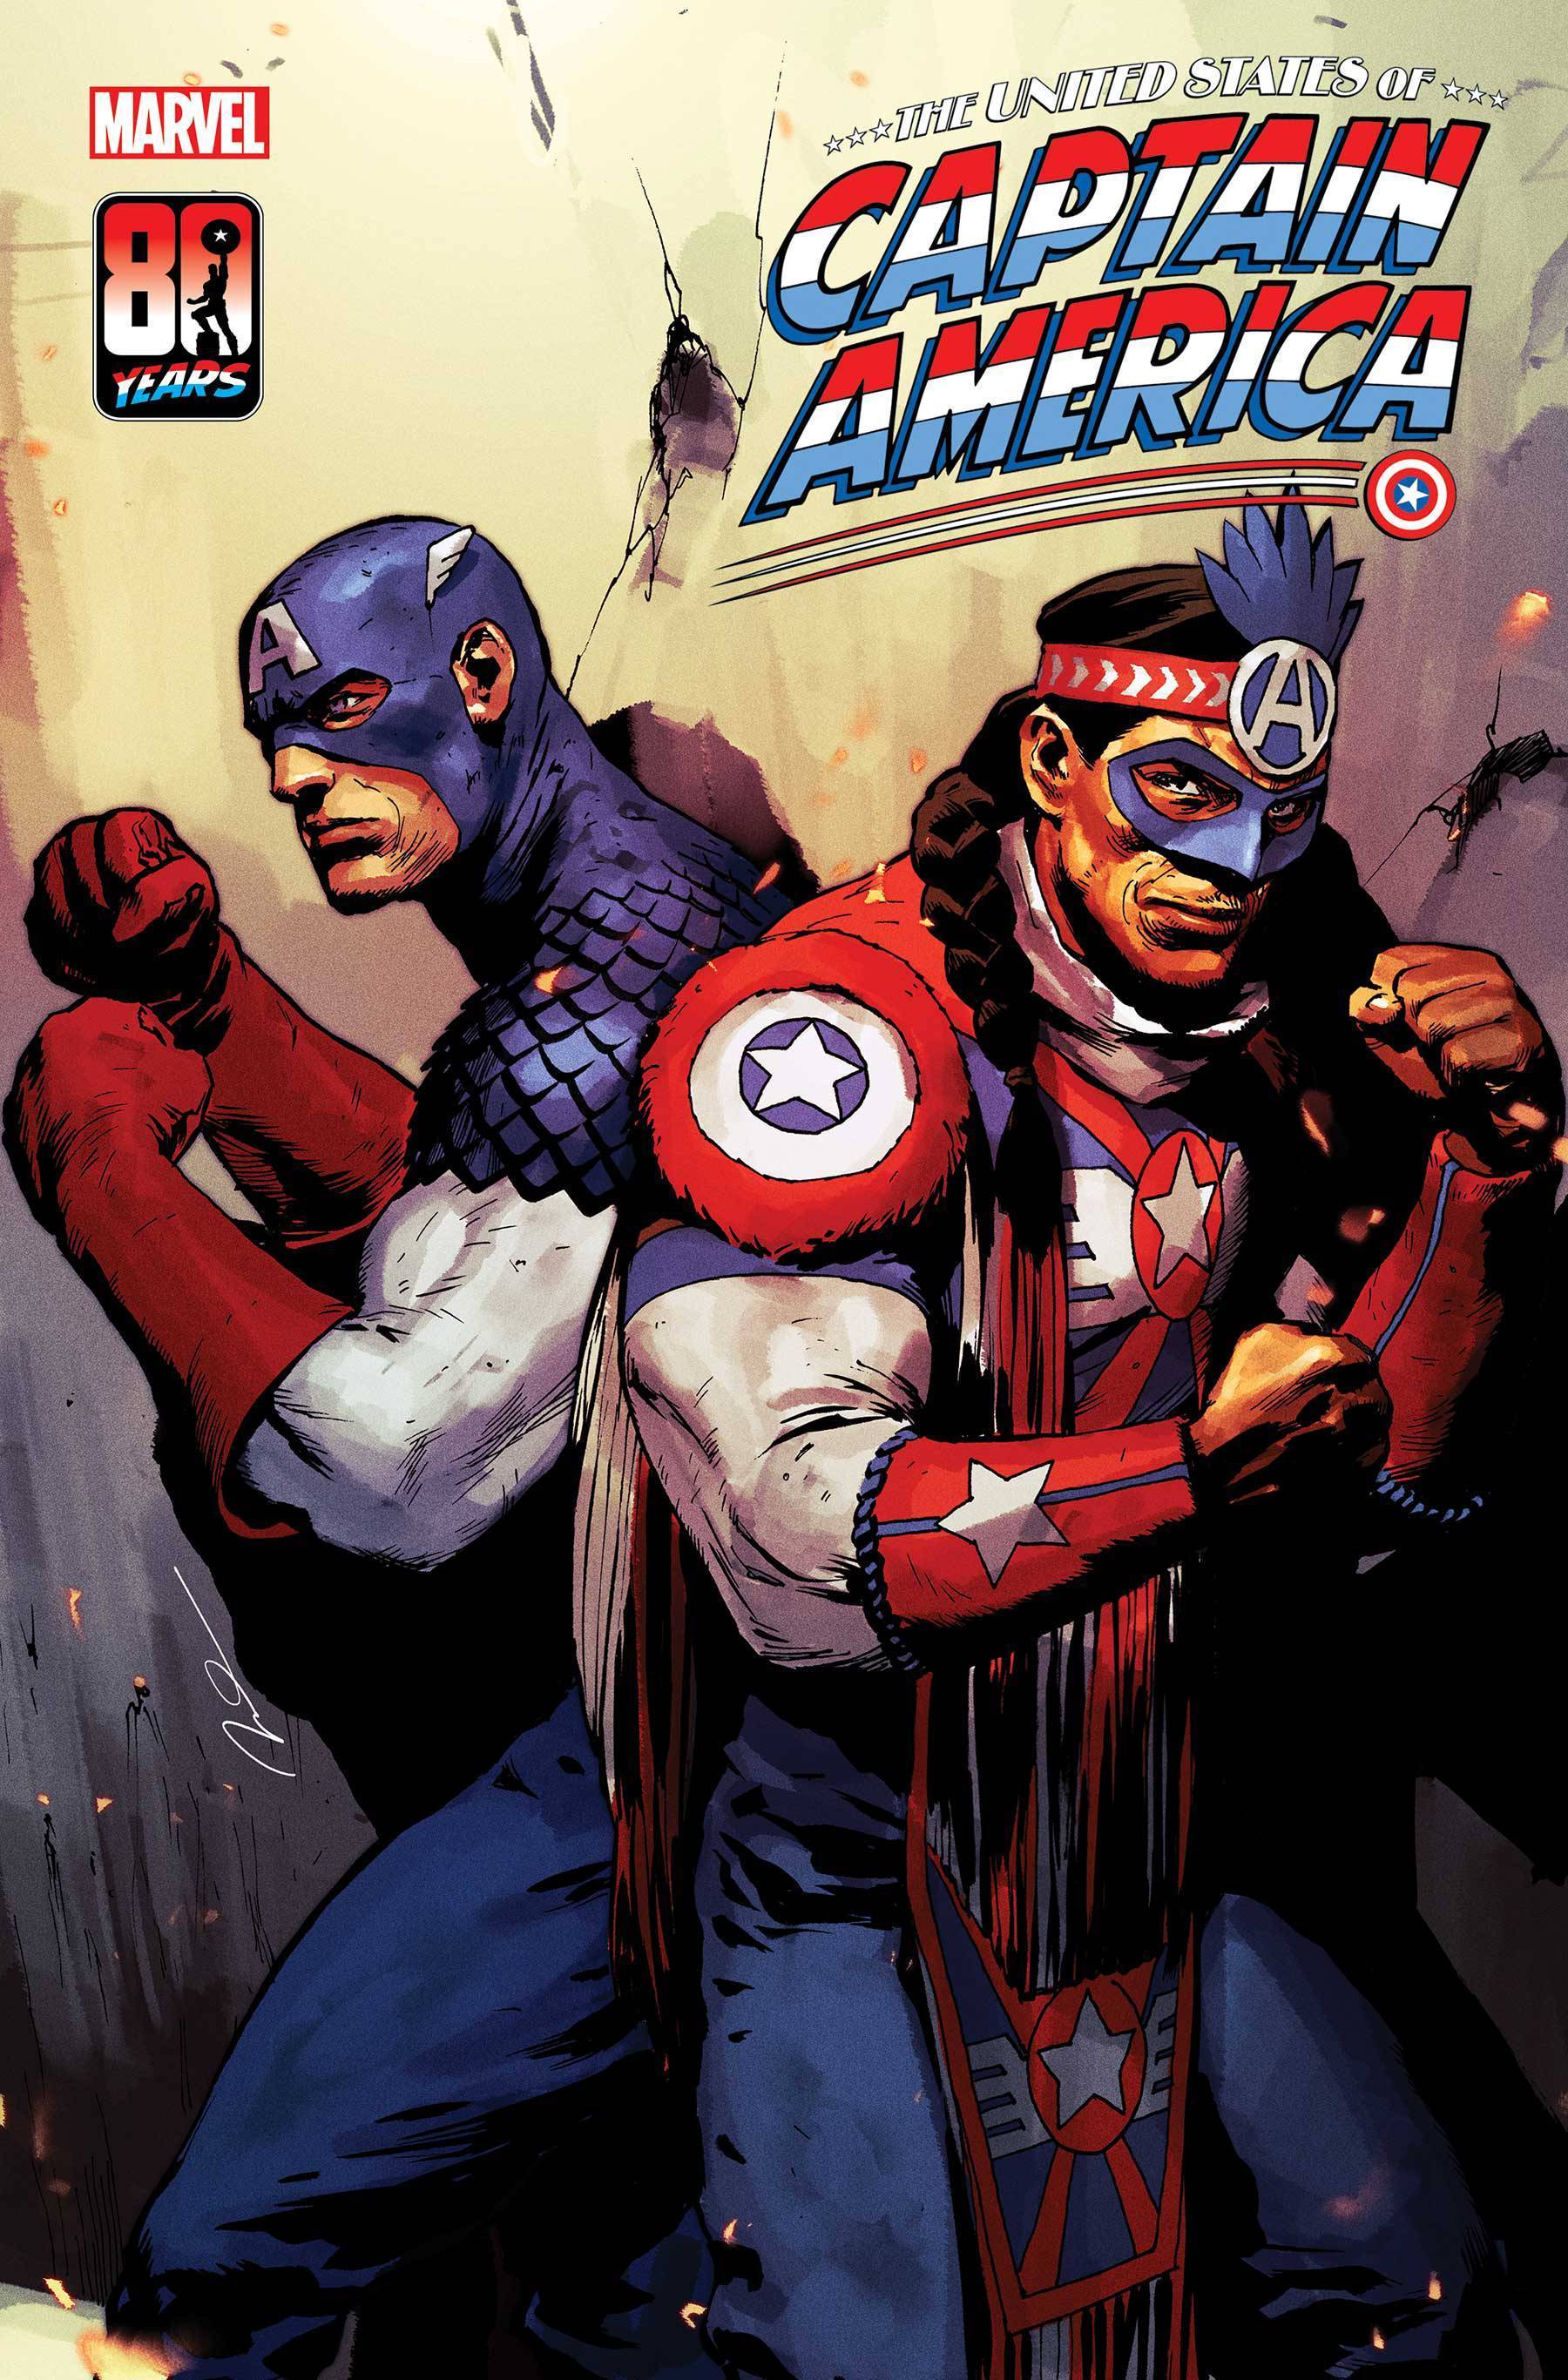 United States Captain America #3 (Of 5) (08/25/2021) - The One Stop Shop Comics & Games